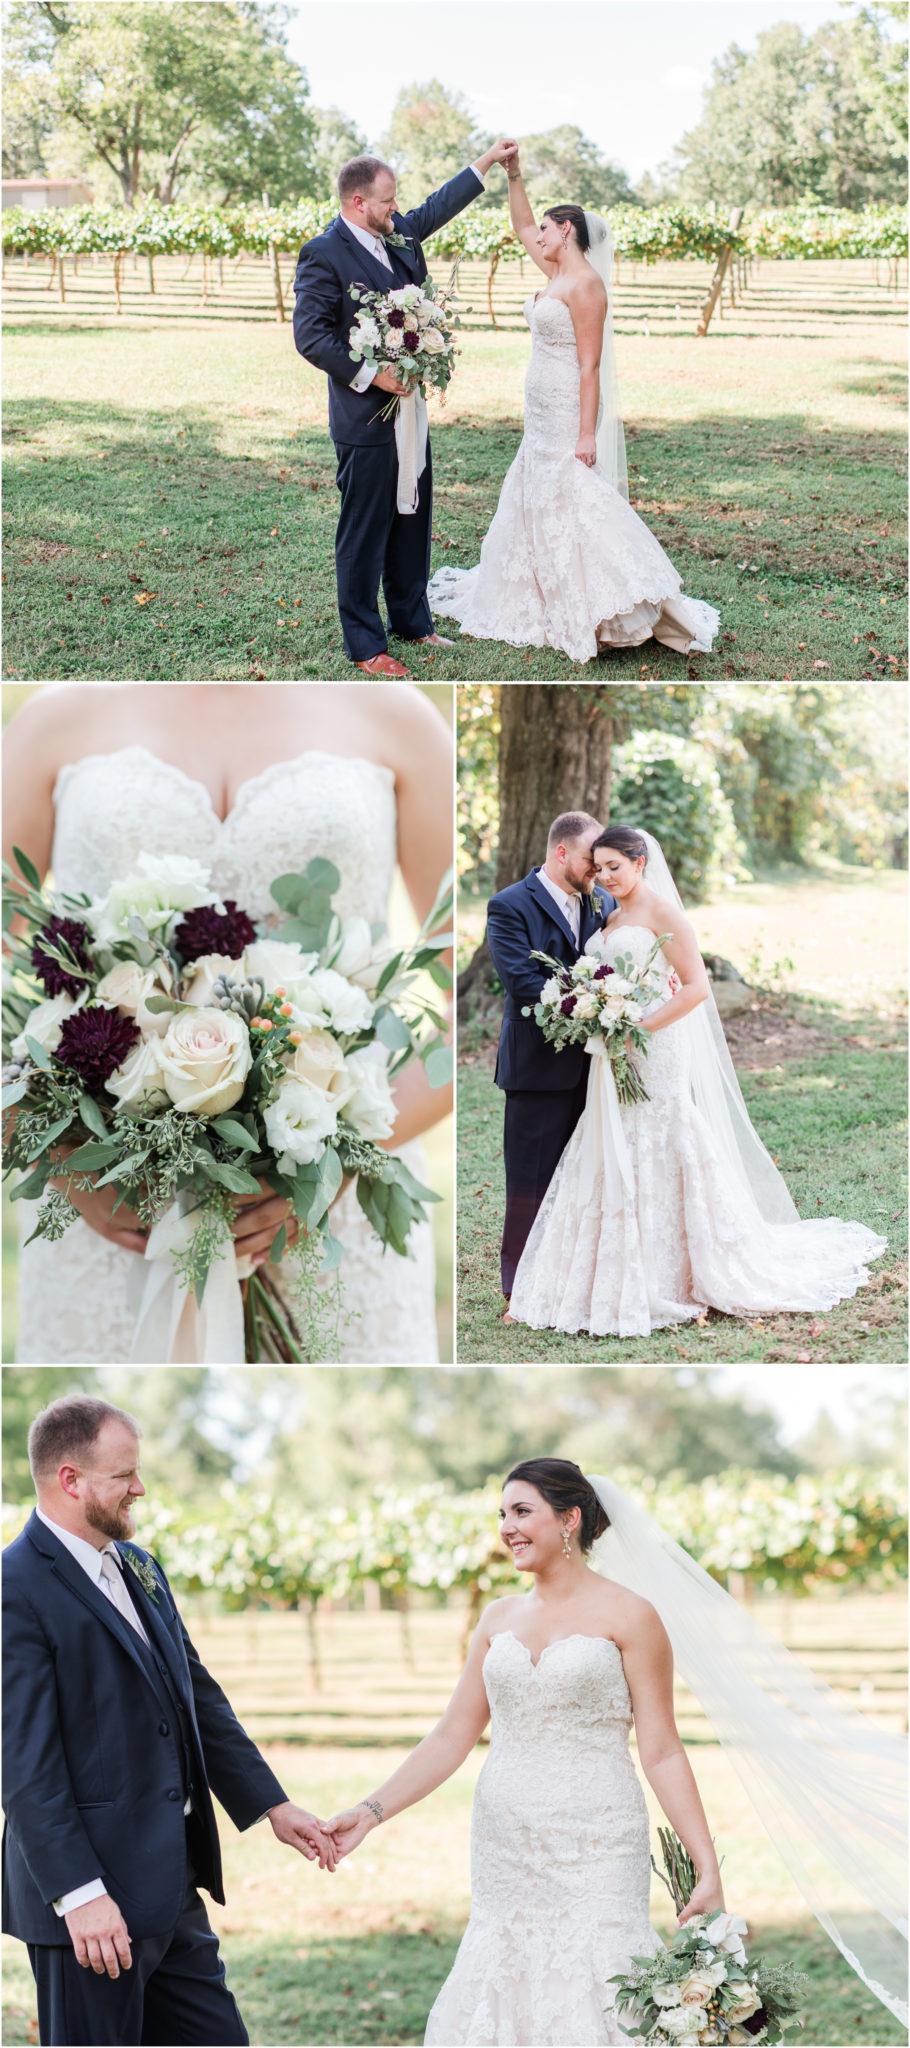 A Vineyard Wedding at Cityscape Winery in Pelter, SC Bride & Groom Photos